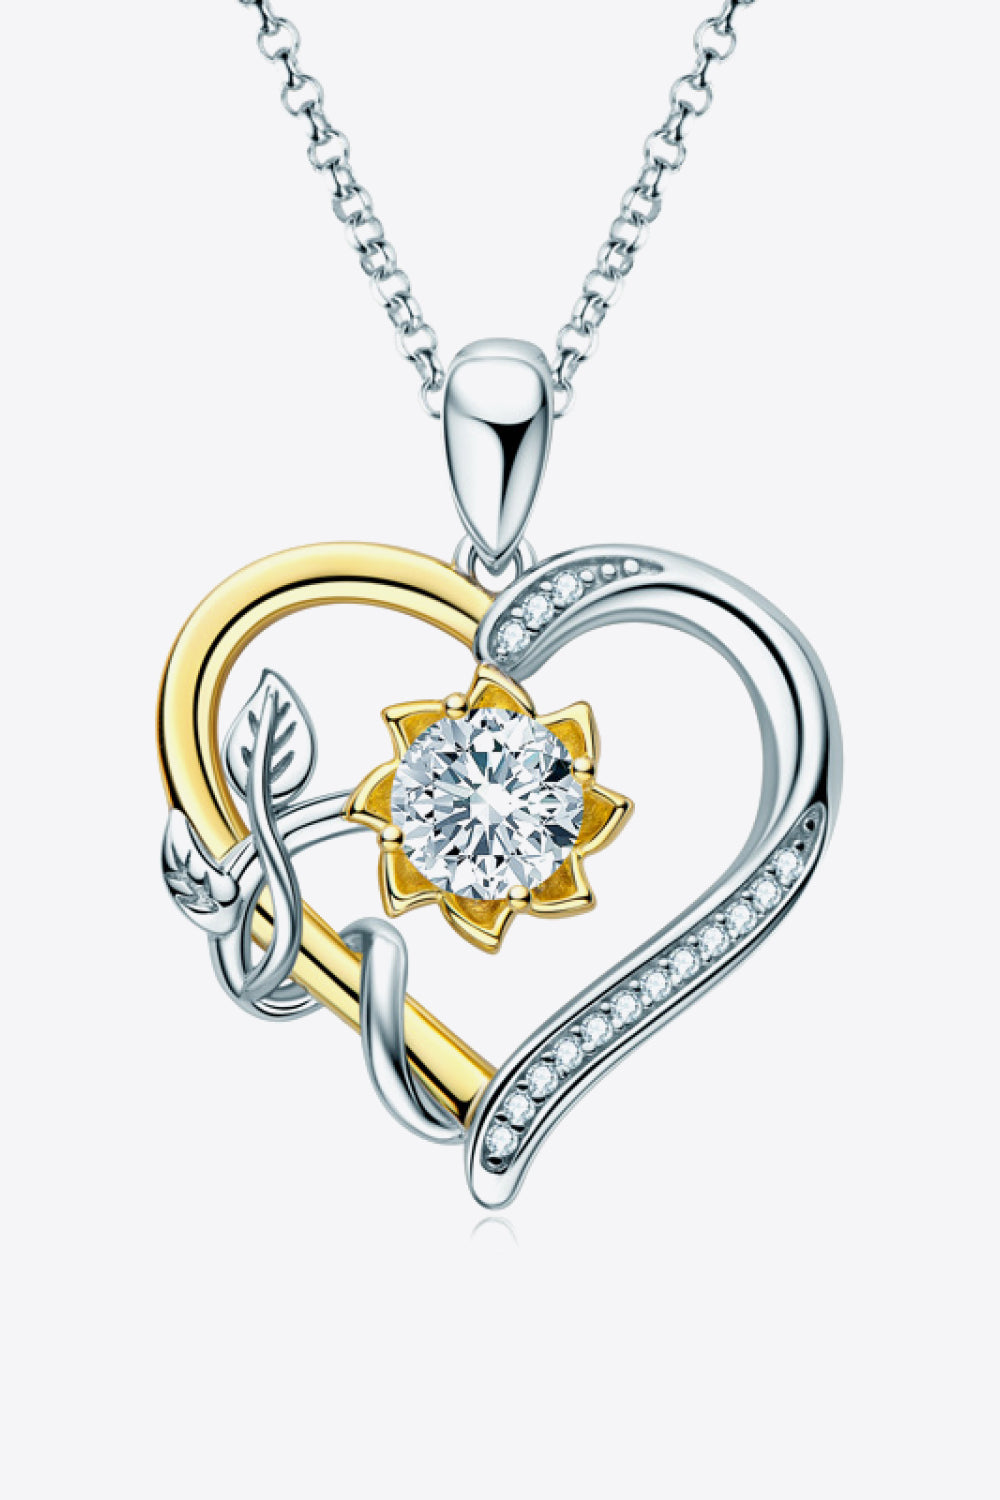 Two-Tone 1 Carat Moissanite Heart Pendant Necklace - Tophatter Shopping Deals